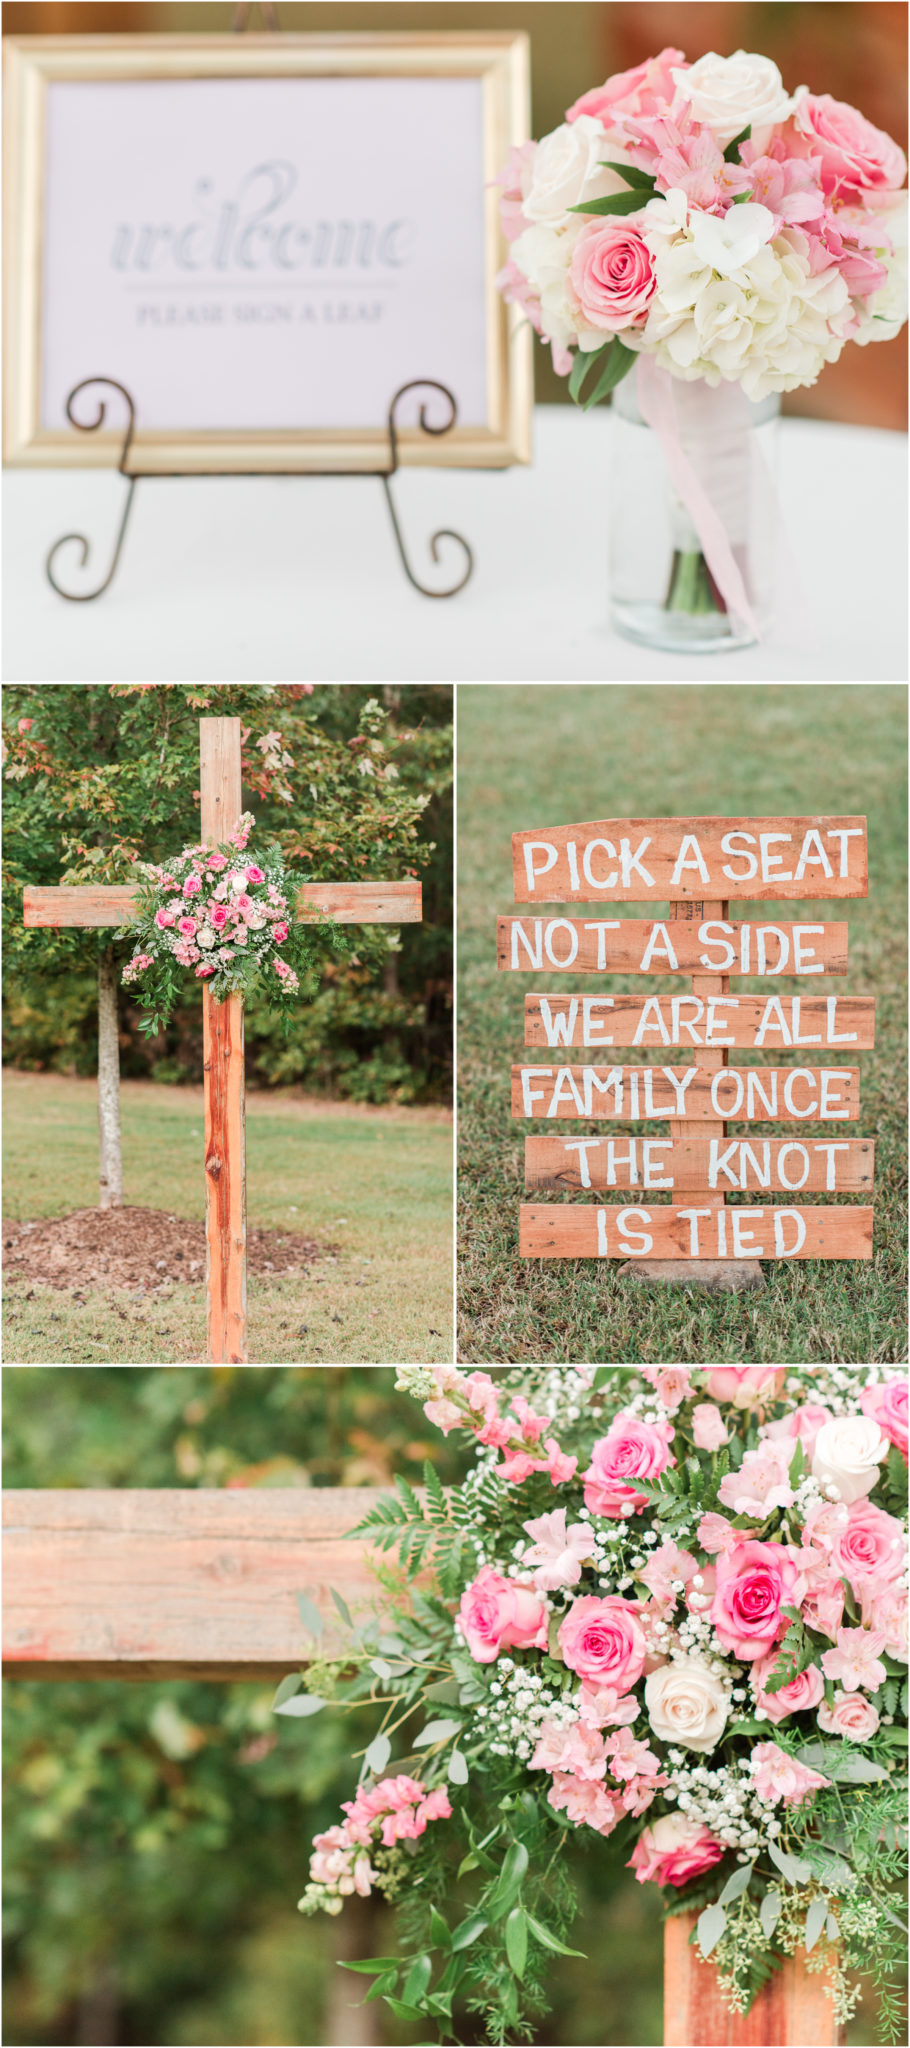 A blush colored Hollow at Paris Mountain wedding in Greenville, South Carolina